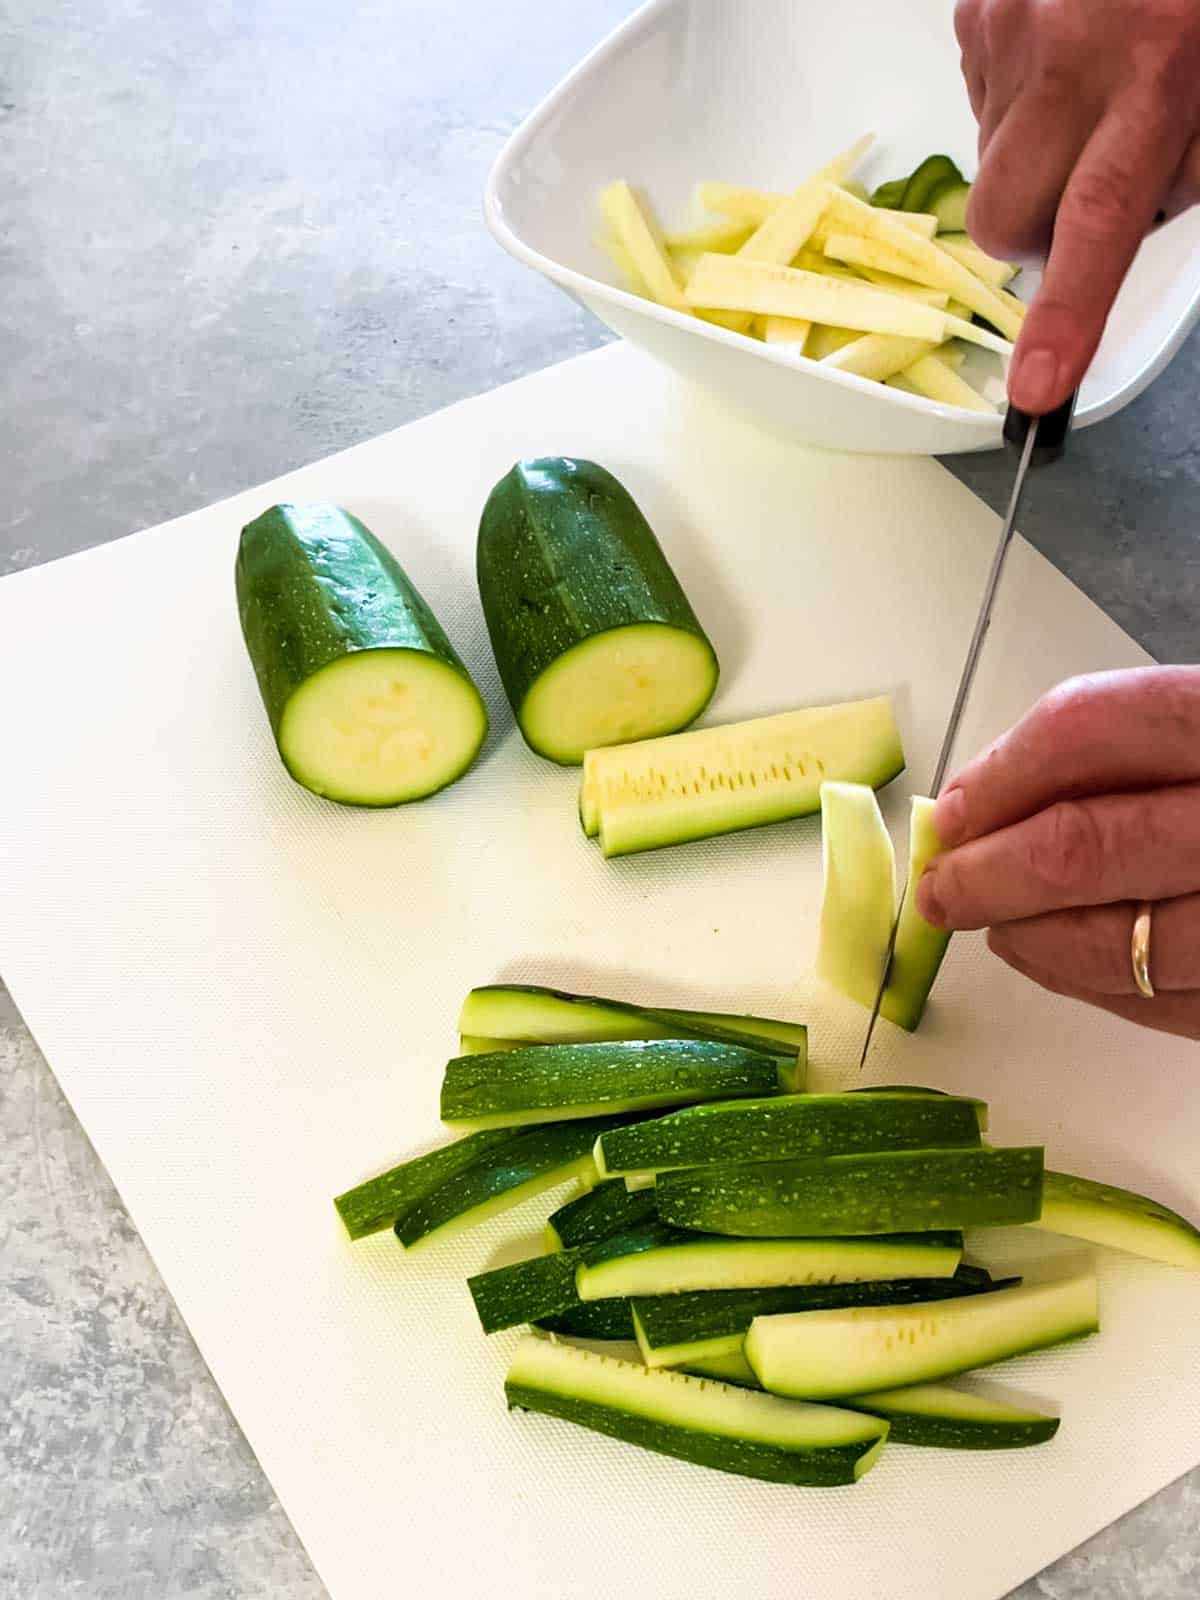 Cutting zucchini into sticks and cutting away the seeds